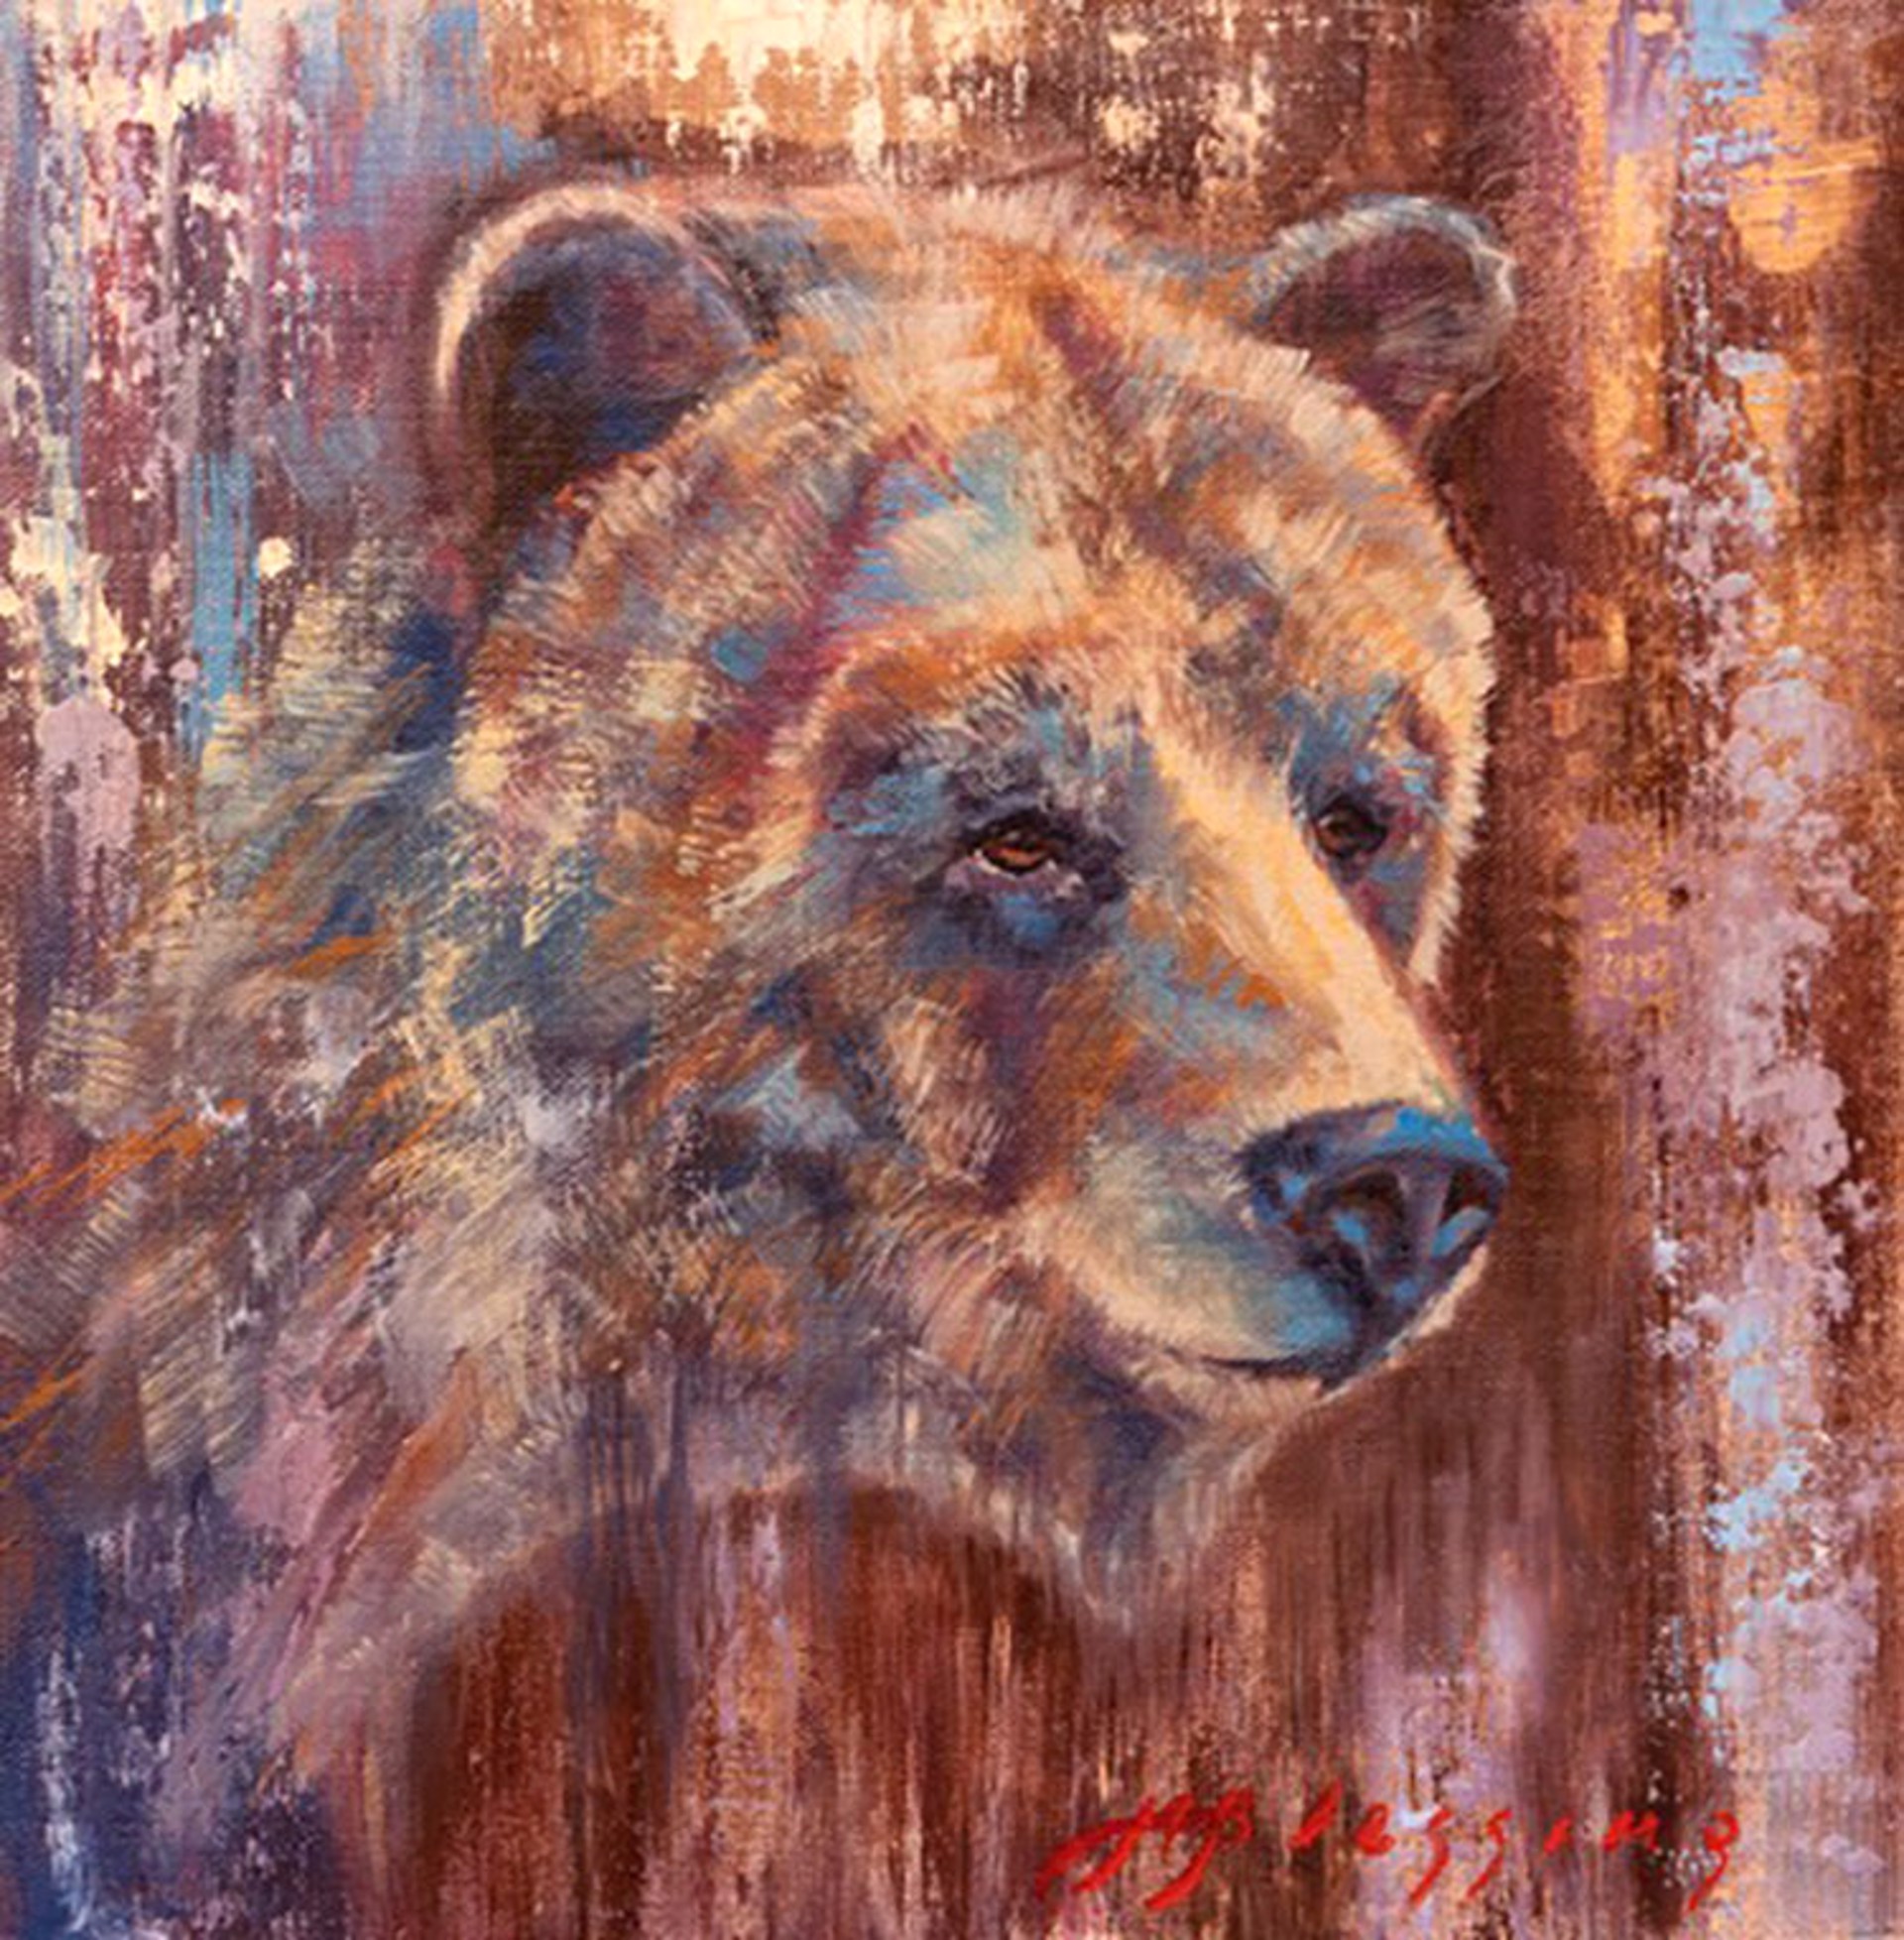 Original Oil Painting Featuring A Grizzly Bear Portrait Over Neutral Abstract Background